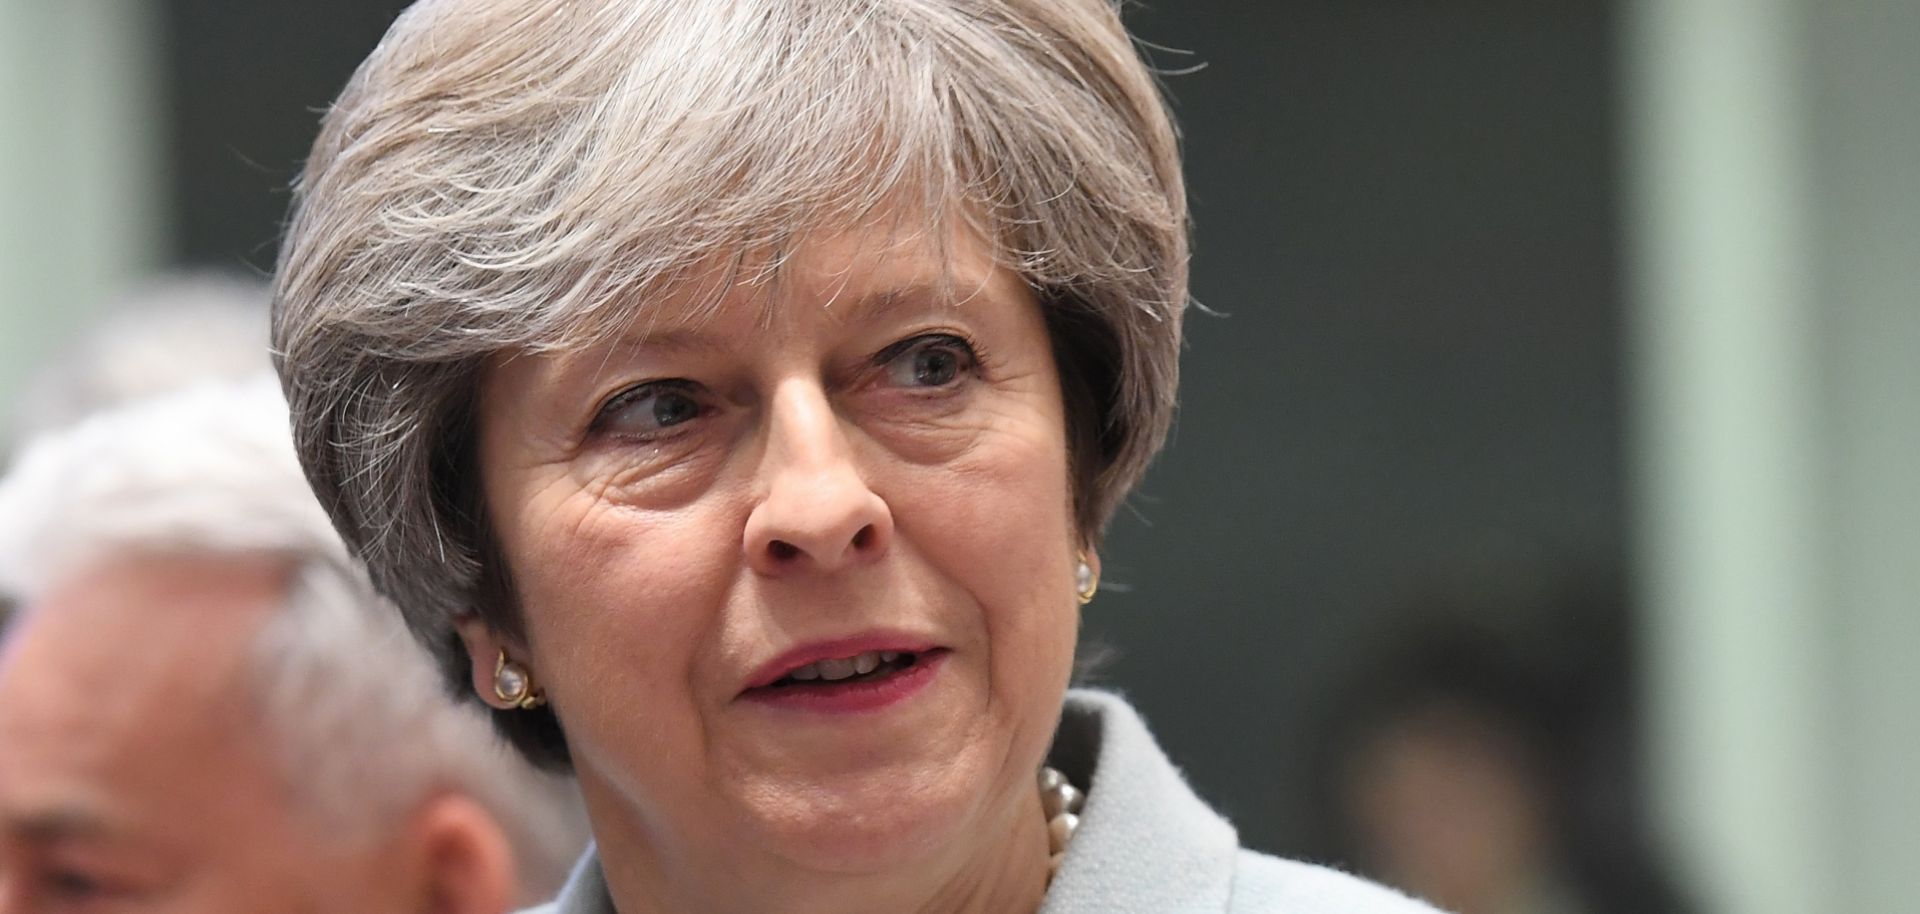 British Prime Minister Theresa May is scheduled to meet Dec. 4 with EU Commission President Jean-Claude Juncker.